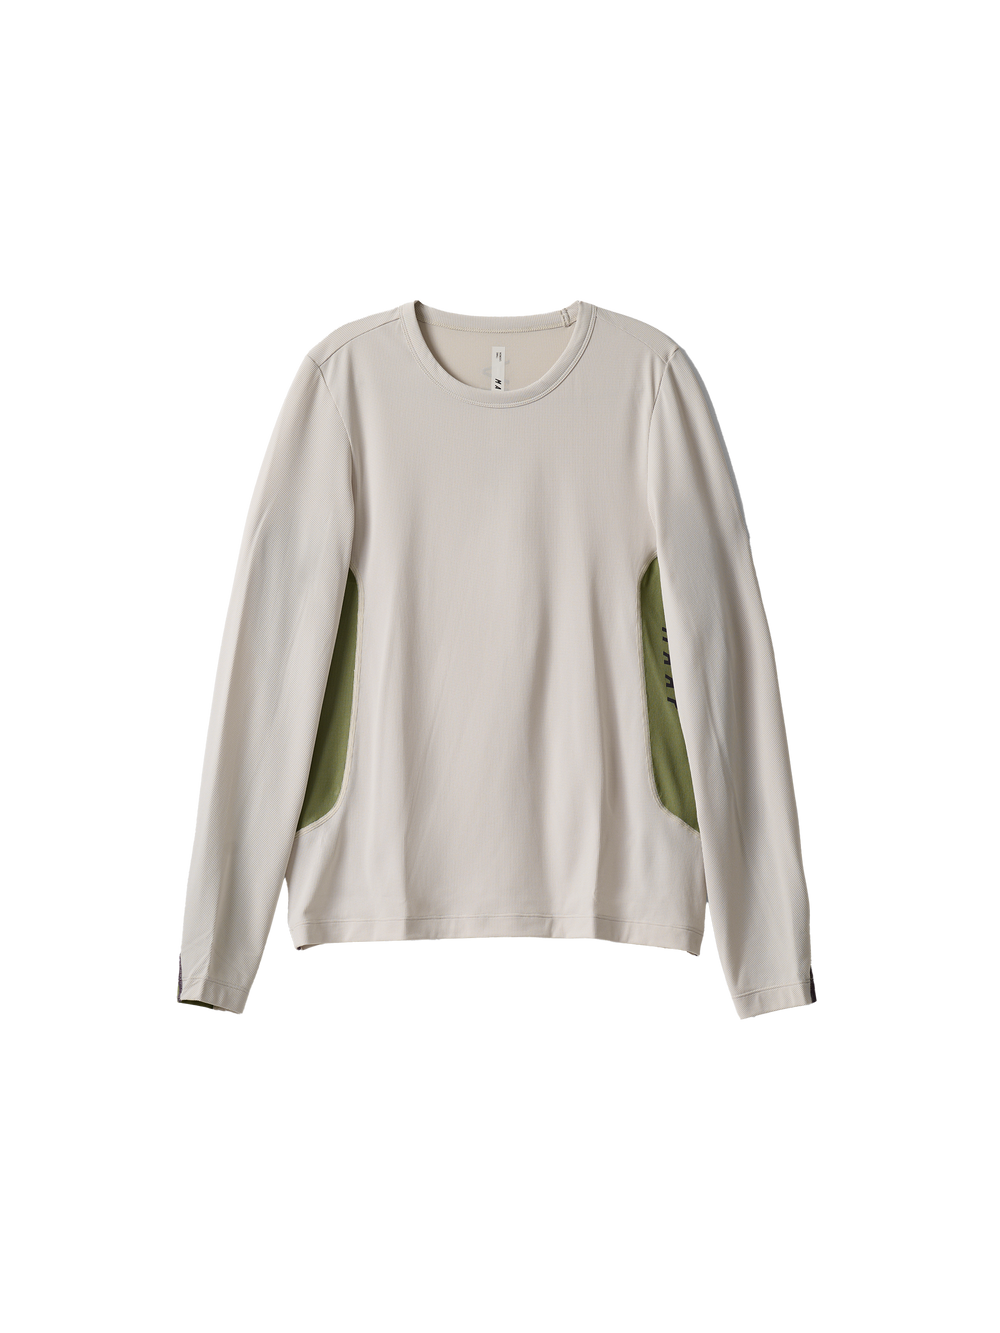 Product Image for Alt_Road Tech LS Tee